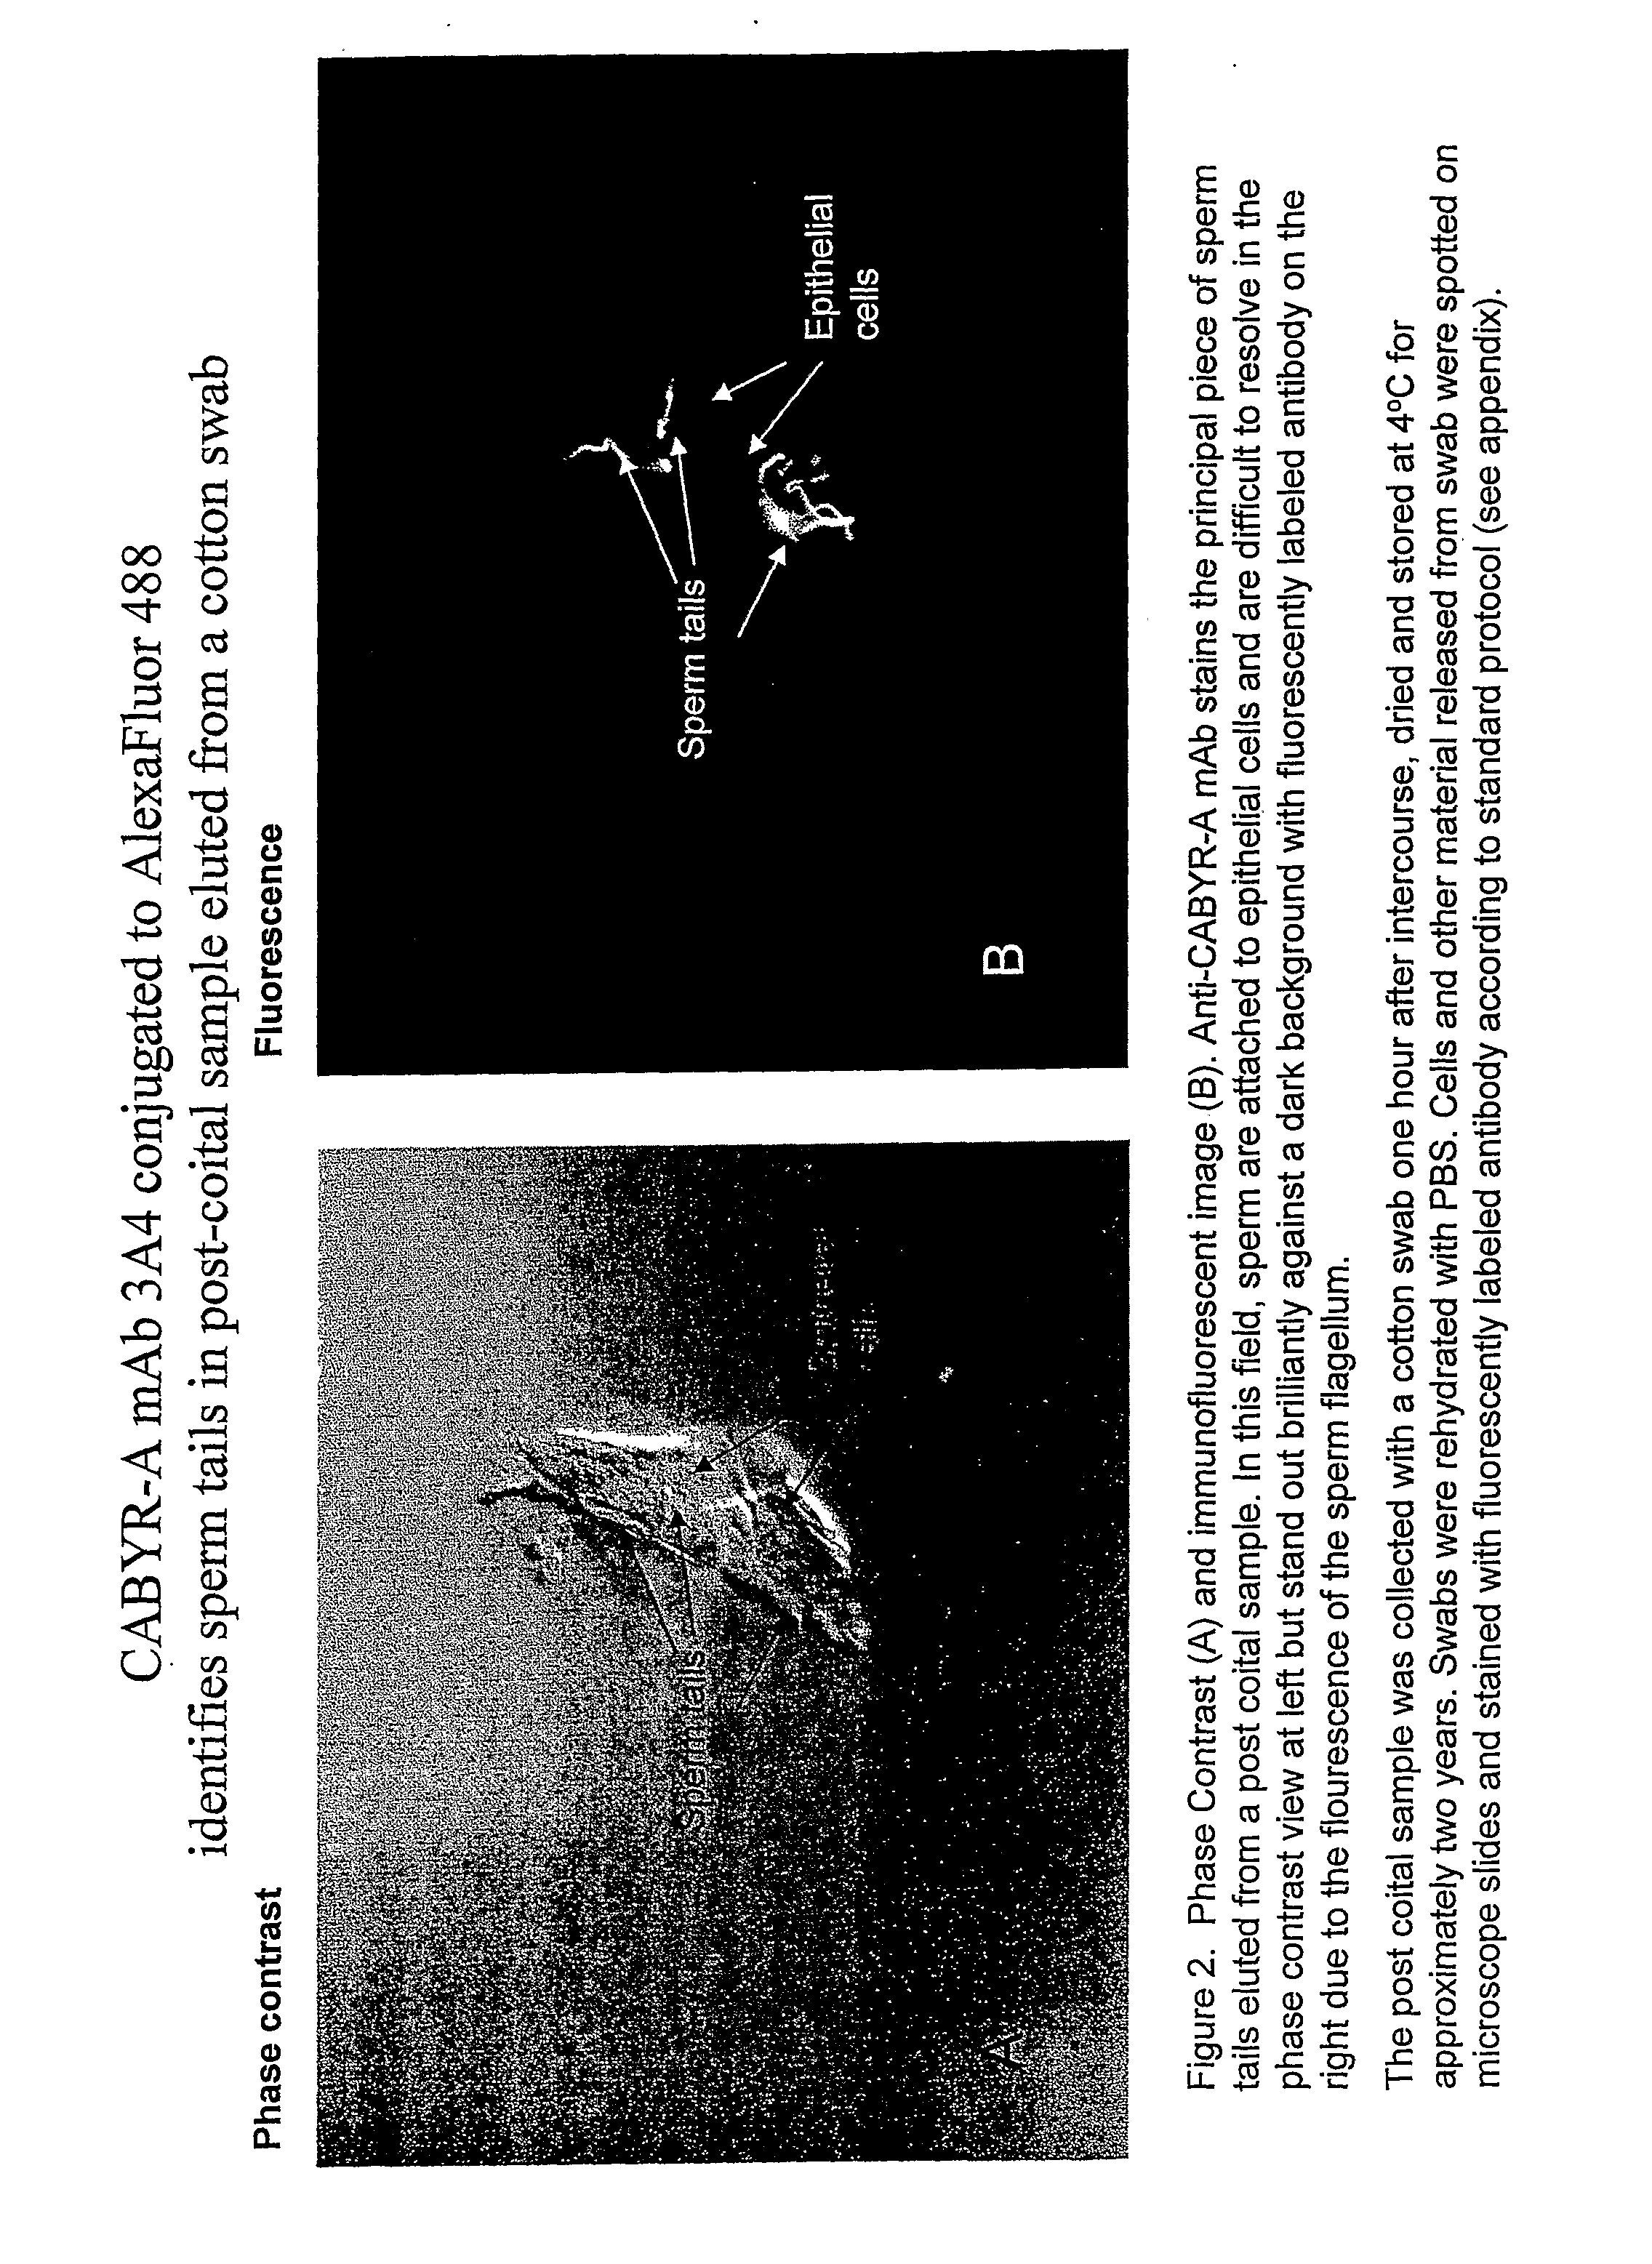 Compositions and Methods for Identifying Sperm for Forensic Applications